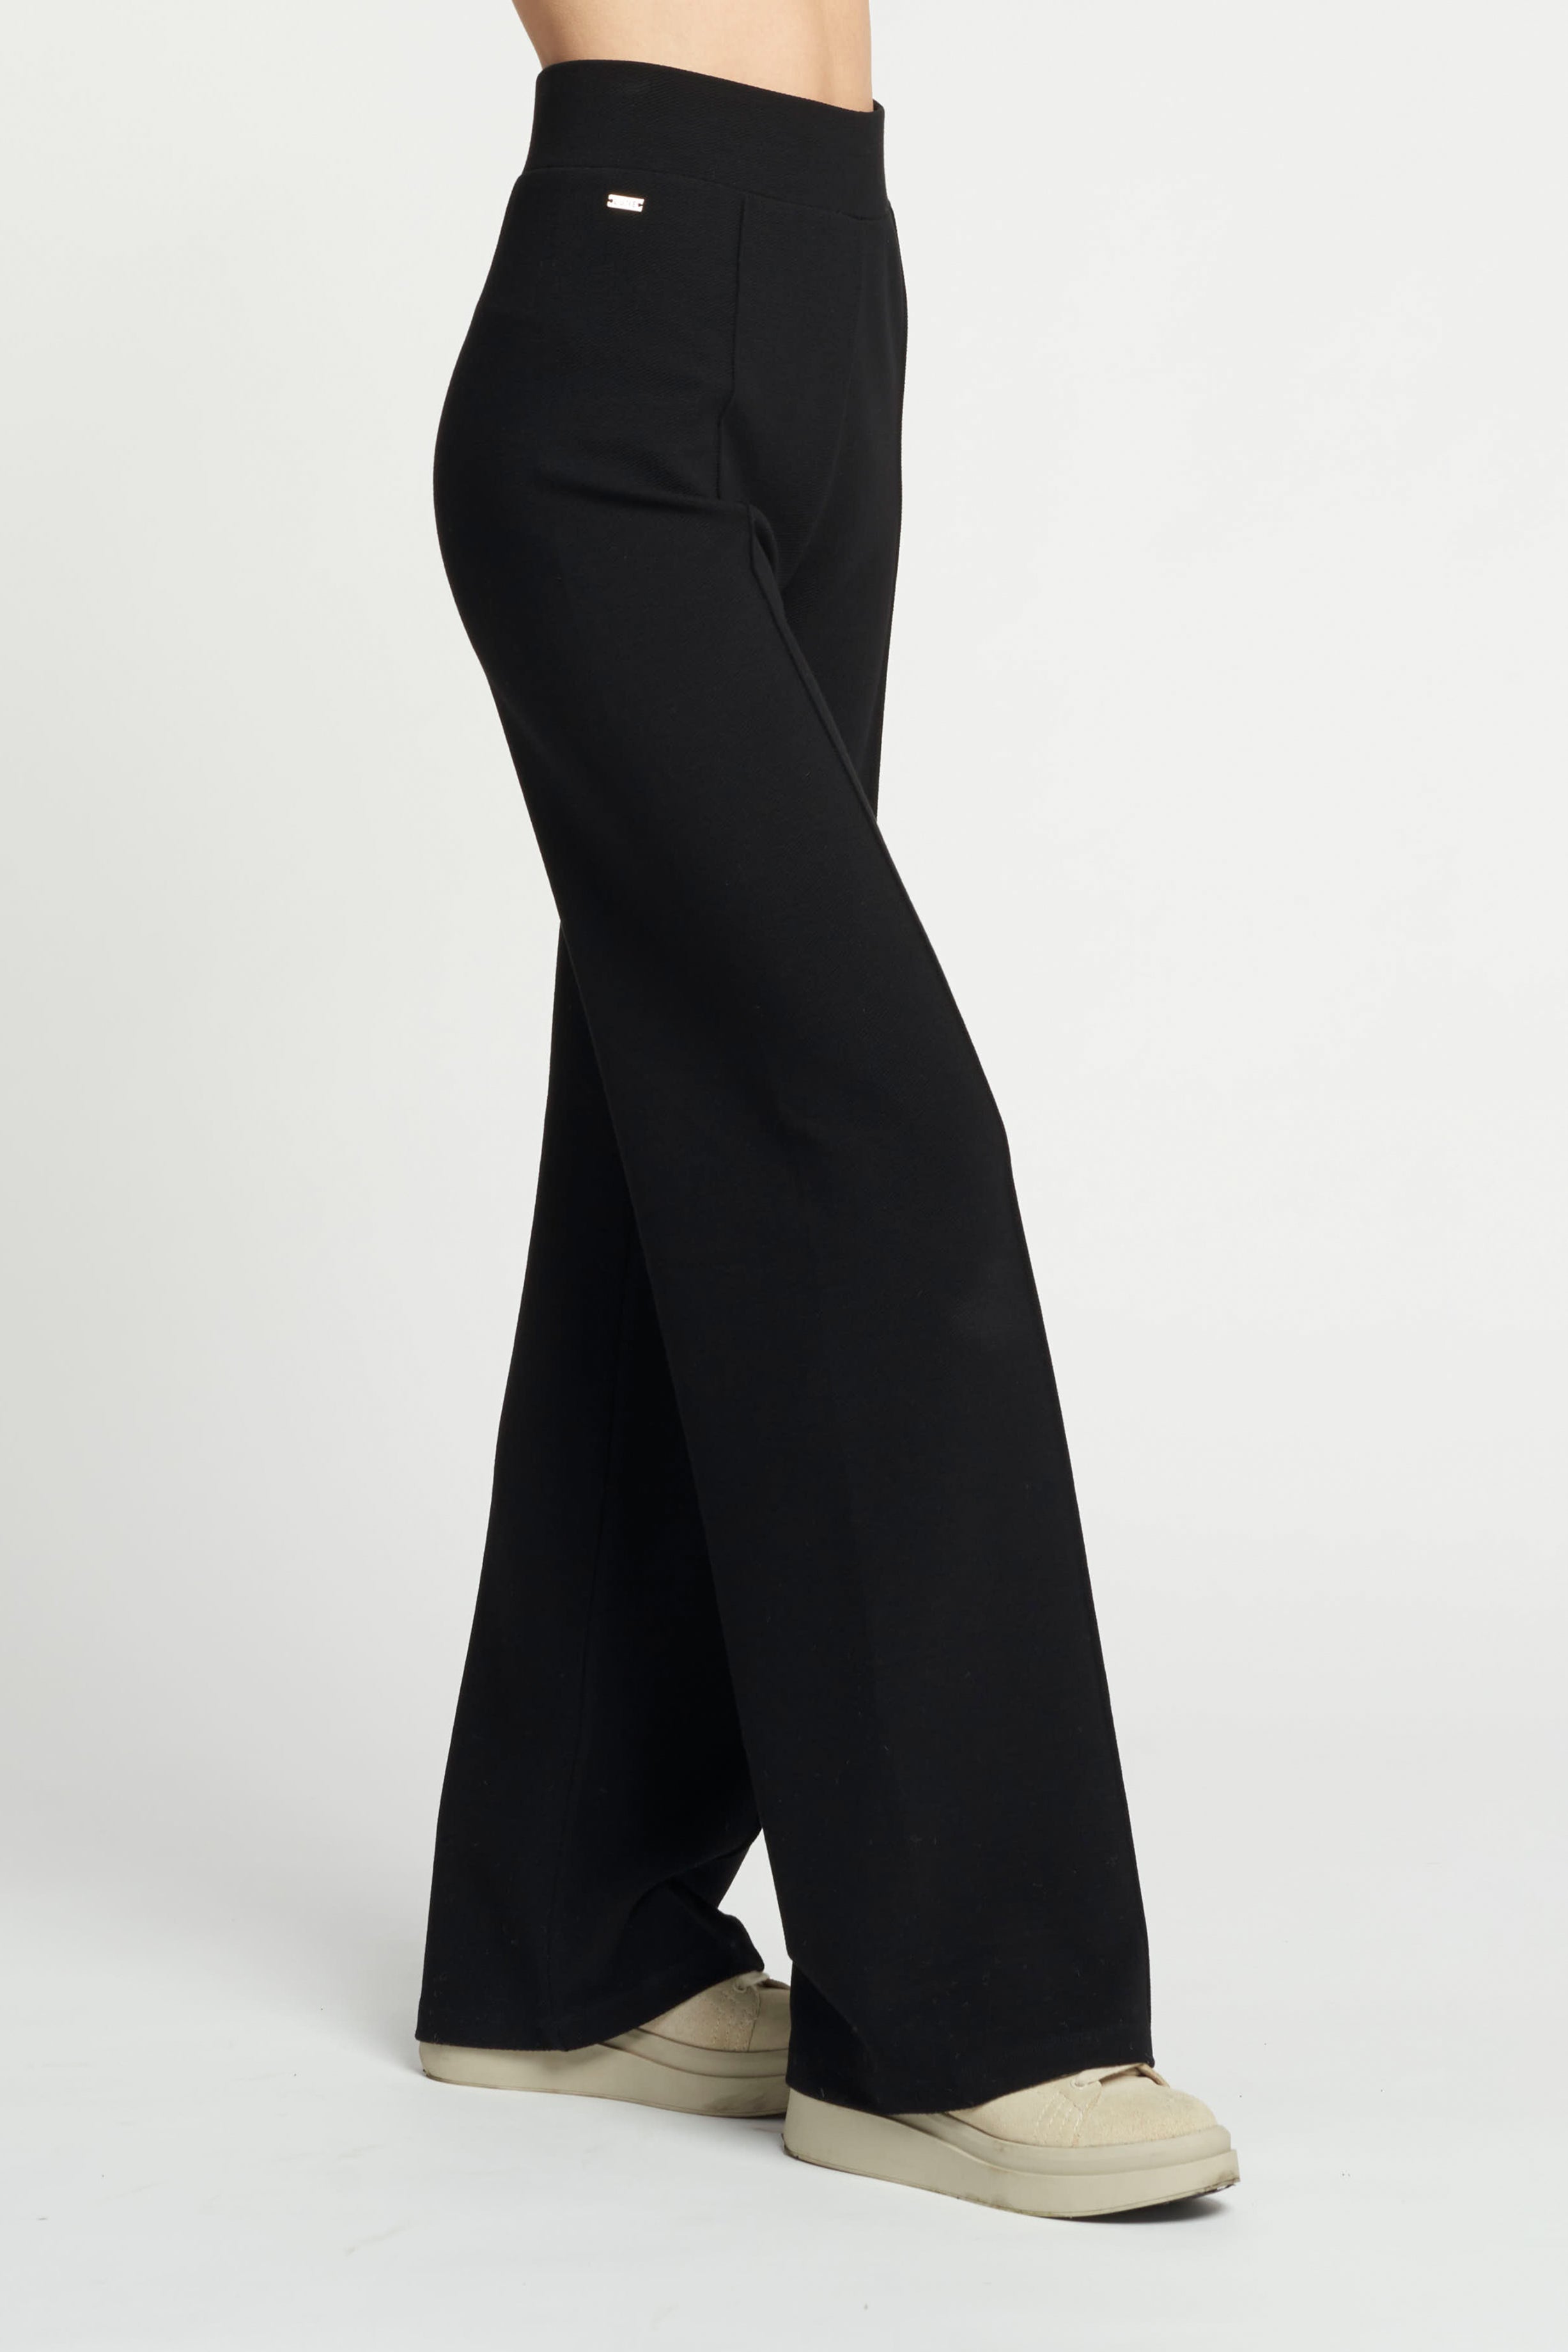 FOREST ESSENTIAL flared pants - Black